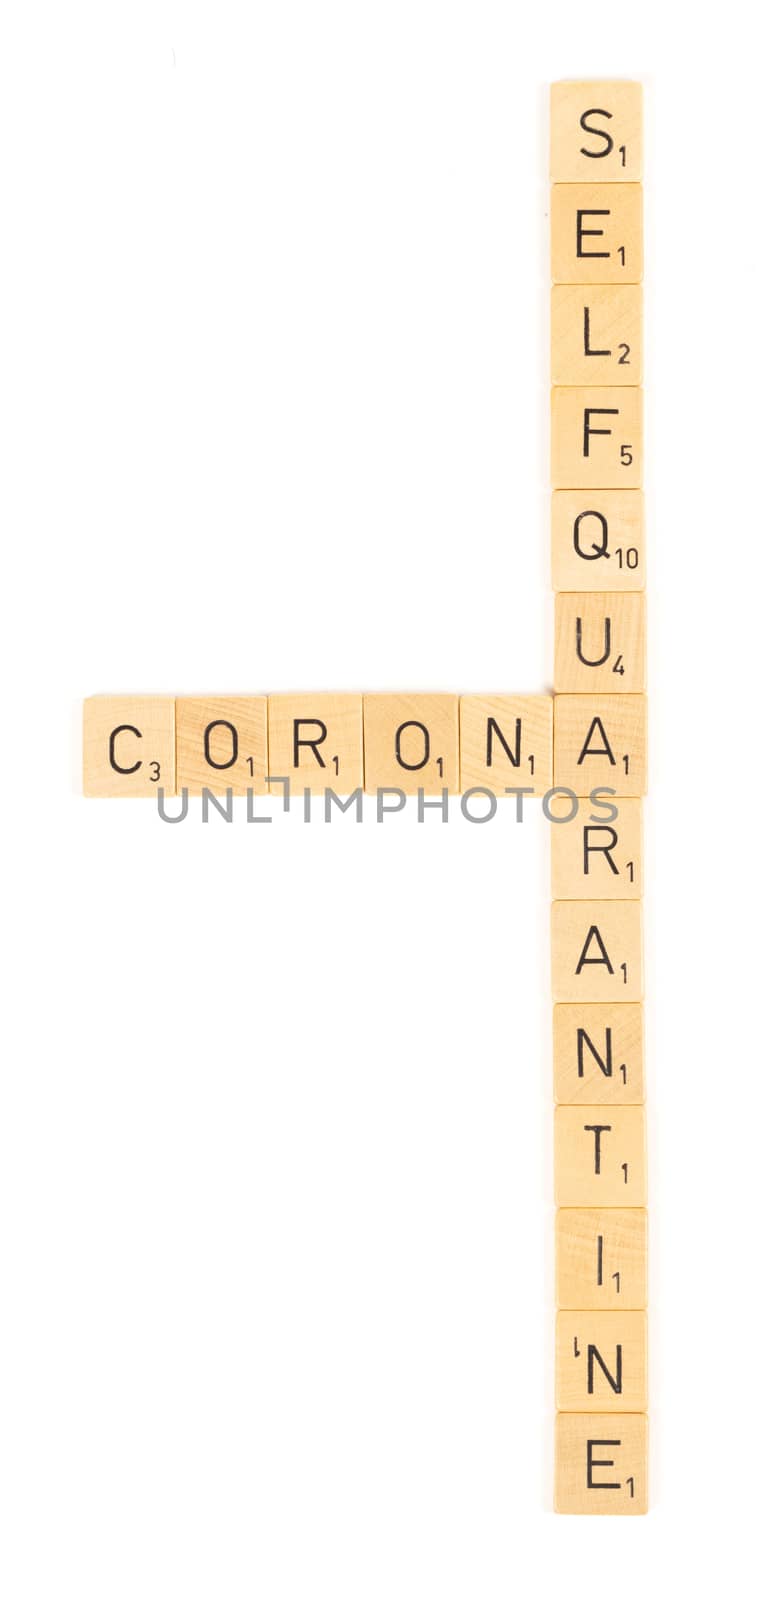 Corona self quarantine scrable letters, isolated on a white background